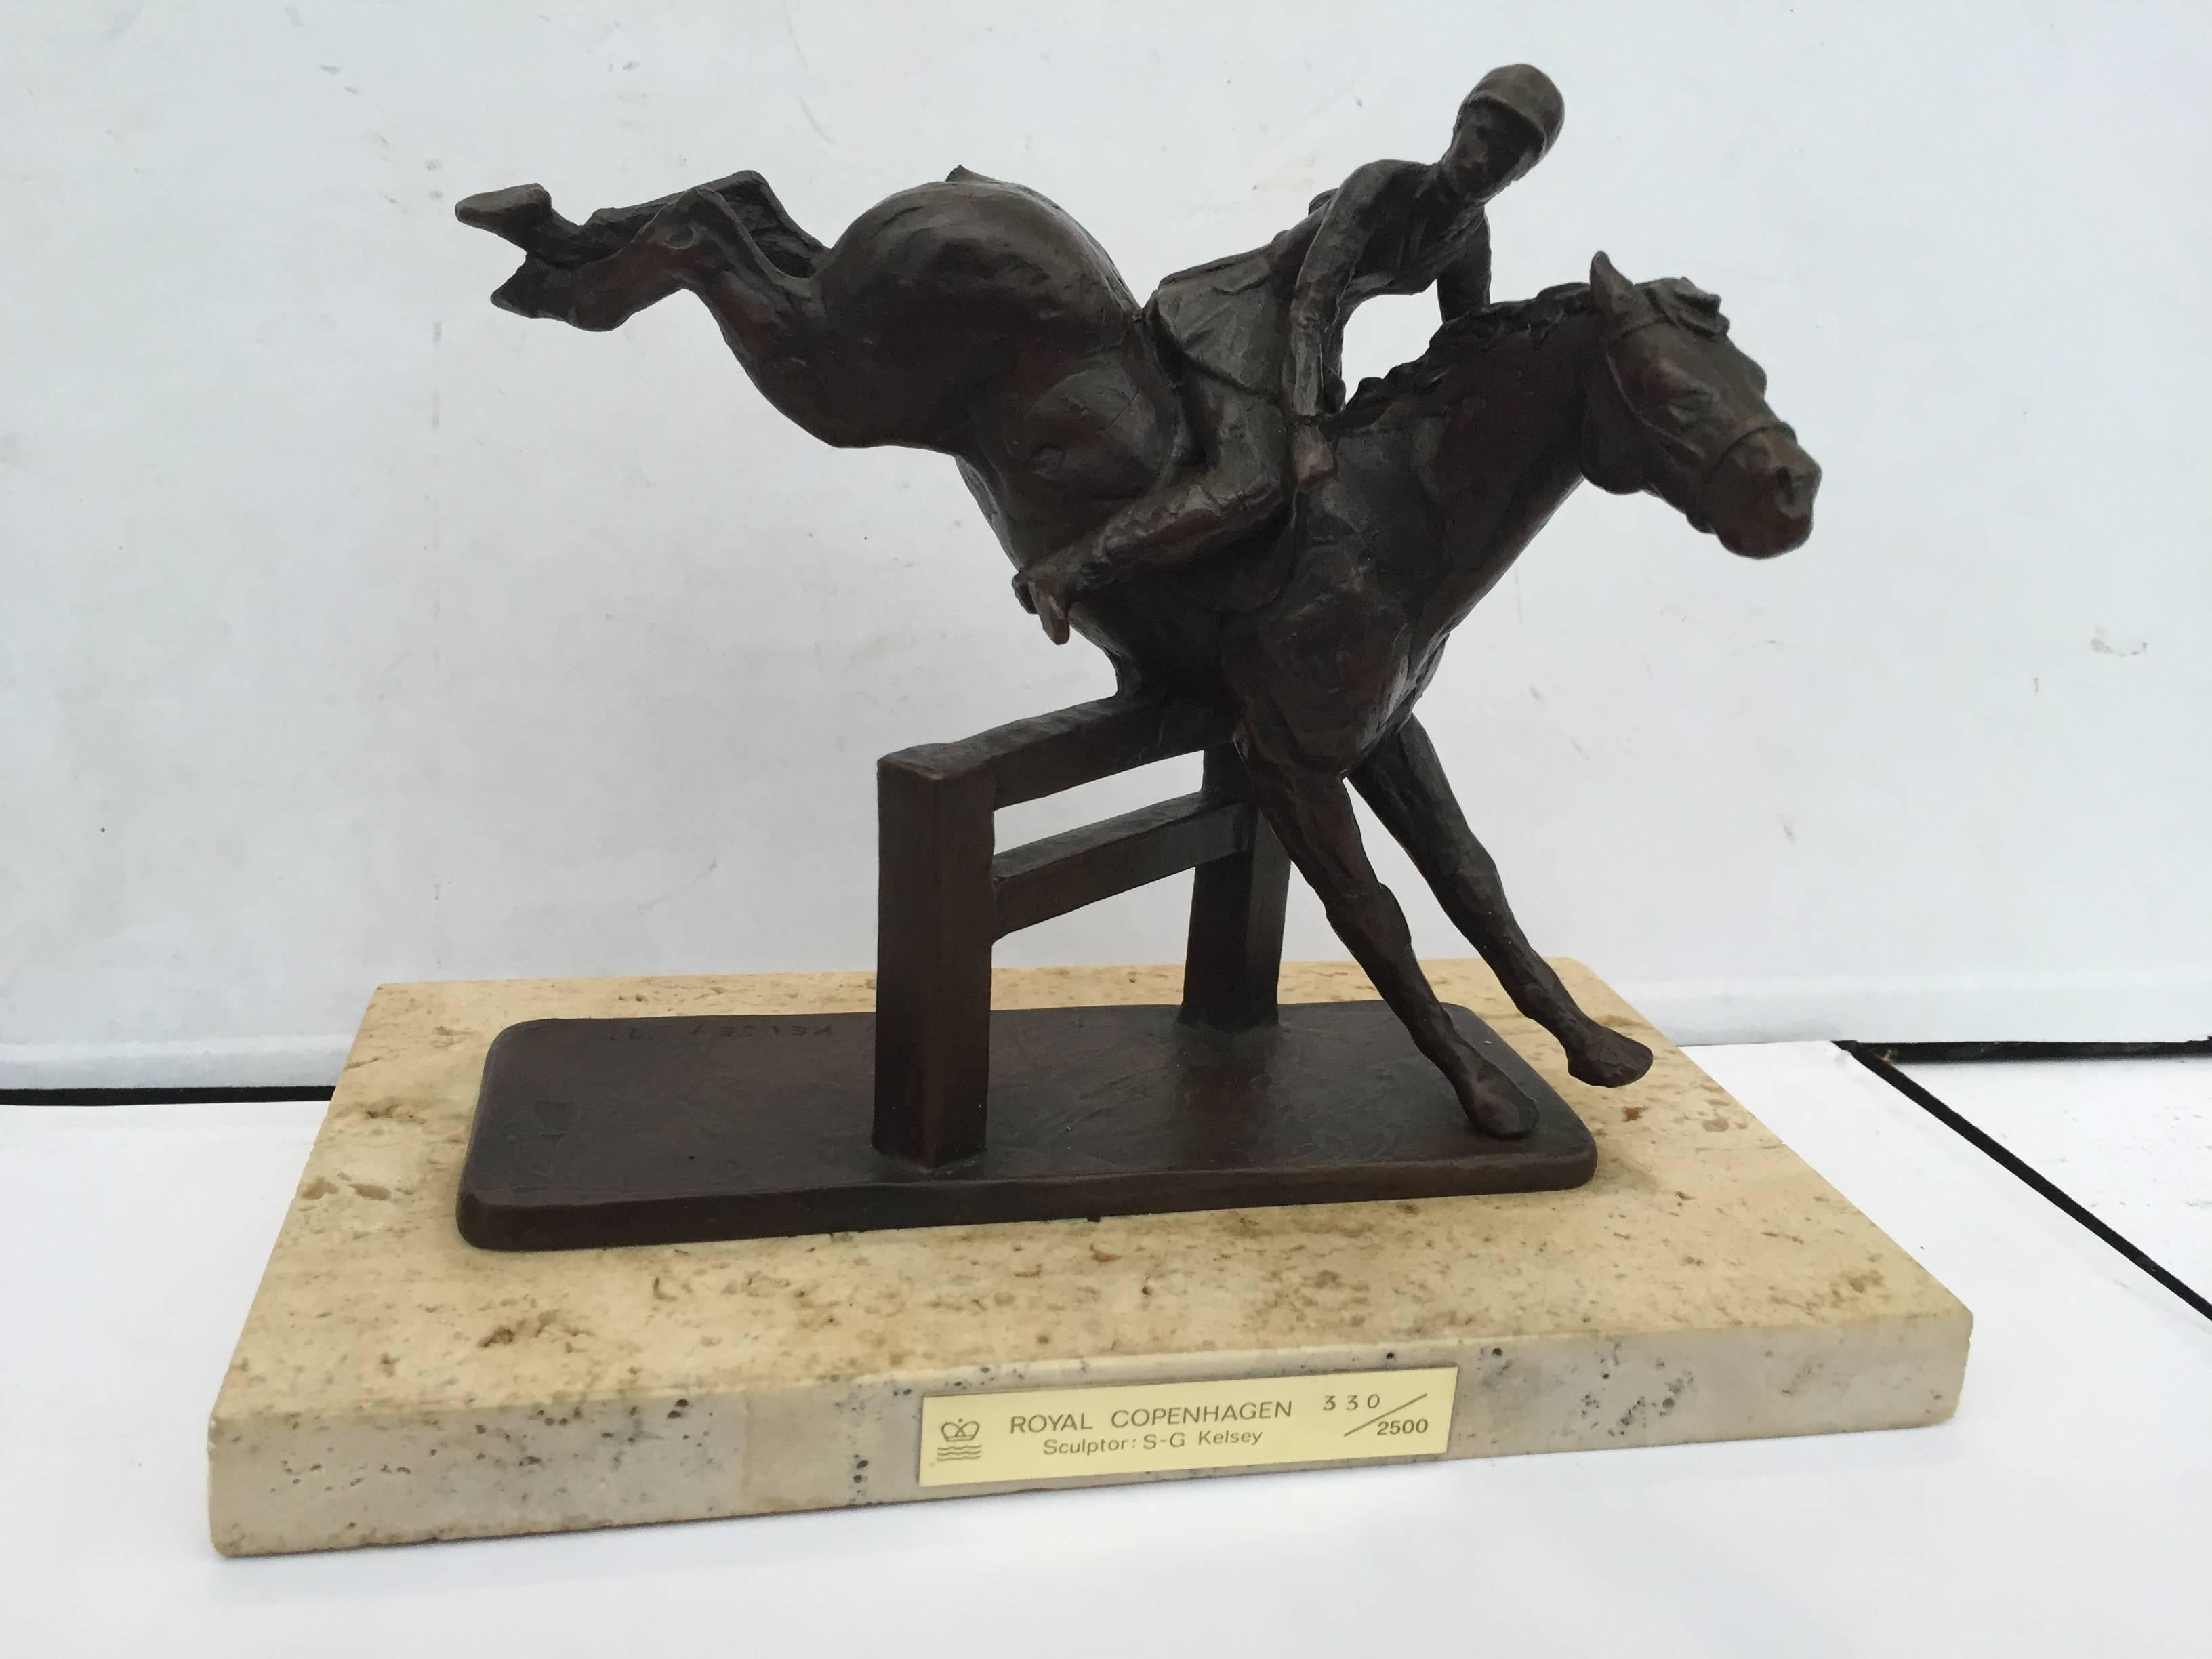 Sterett-Gittings Kelsey bronze girl with horse jumping, on marble base 1977 for Royal Copenhagen with plate dated and numbered 126/2500.